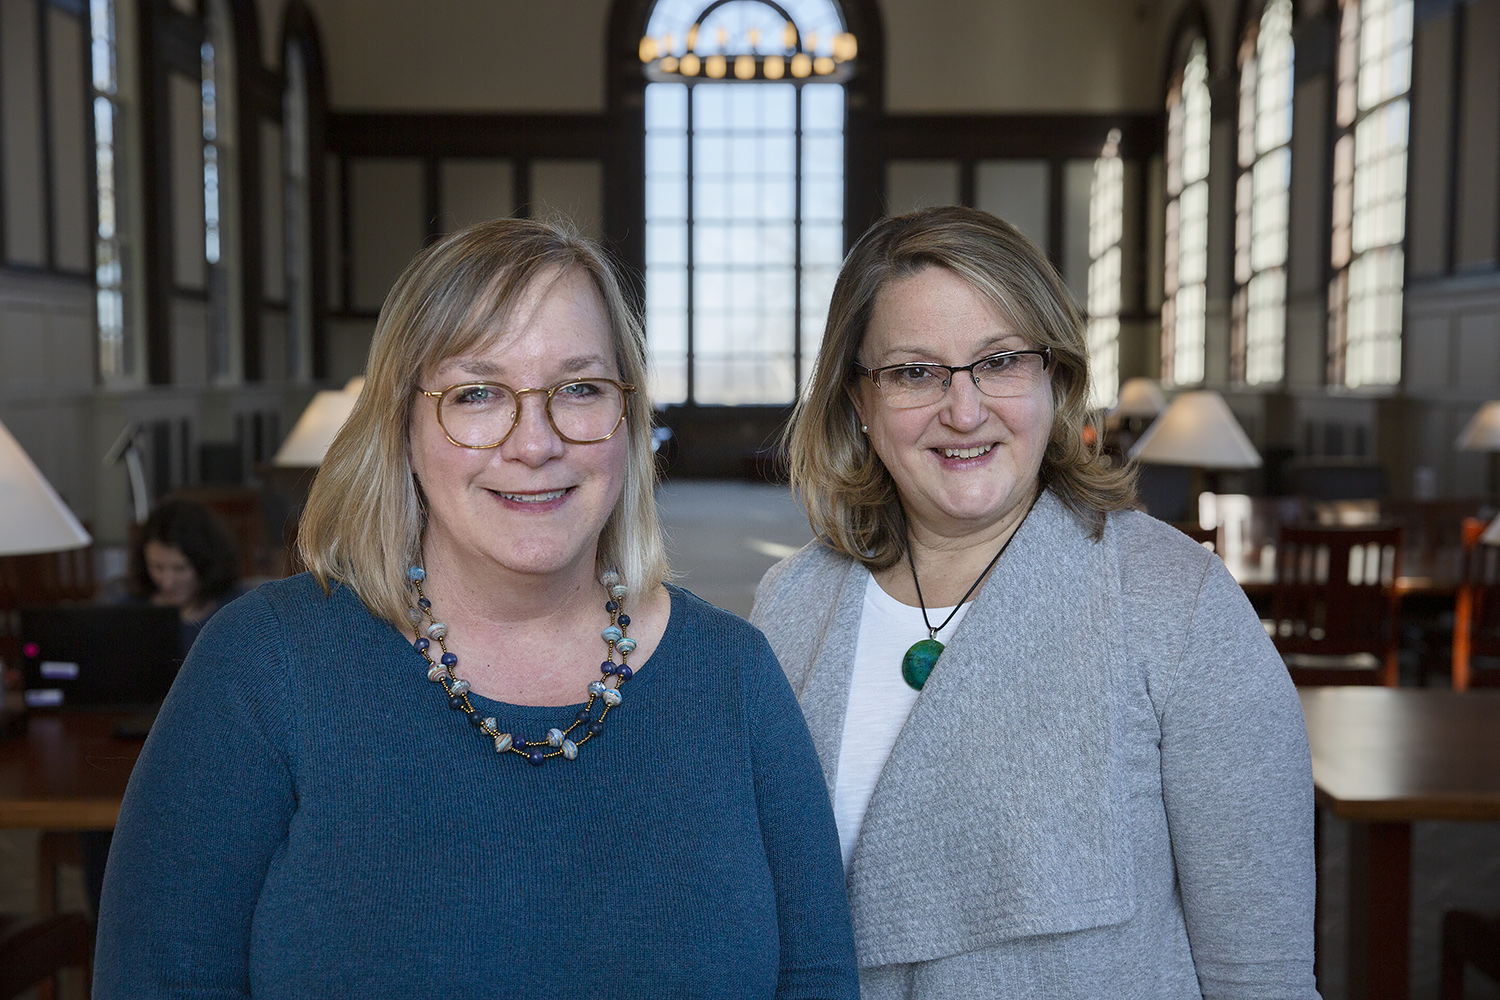 Katharine Capshaw and Lisa Park Boush stand together in the Wilbur Cross Building